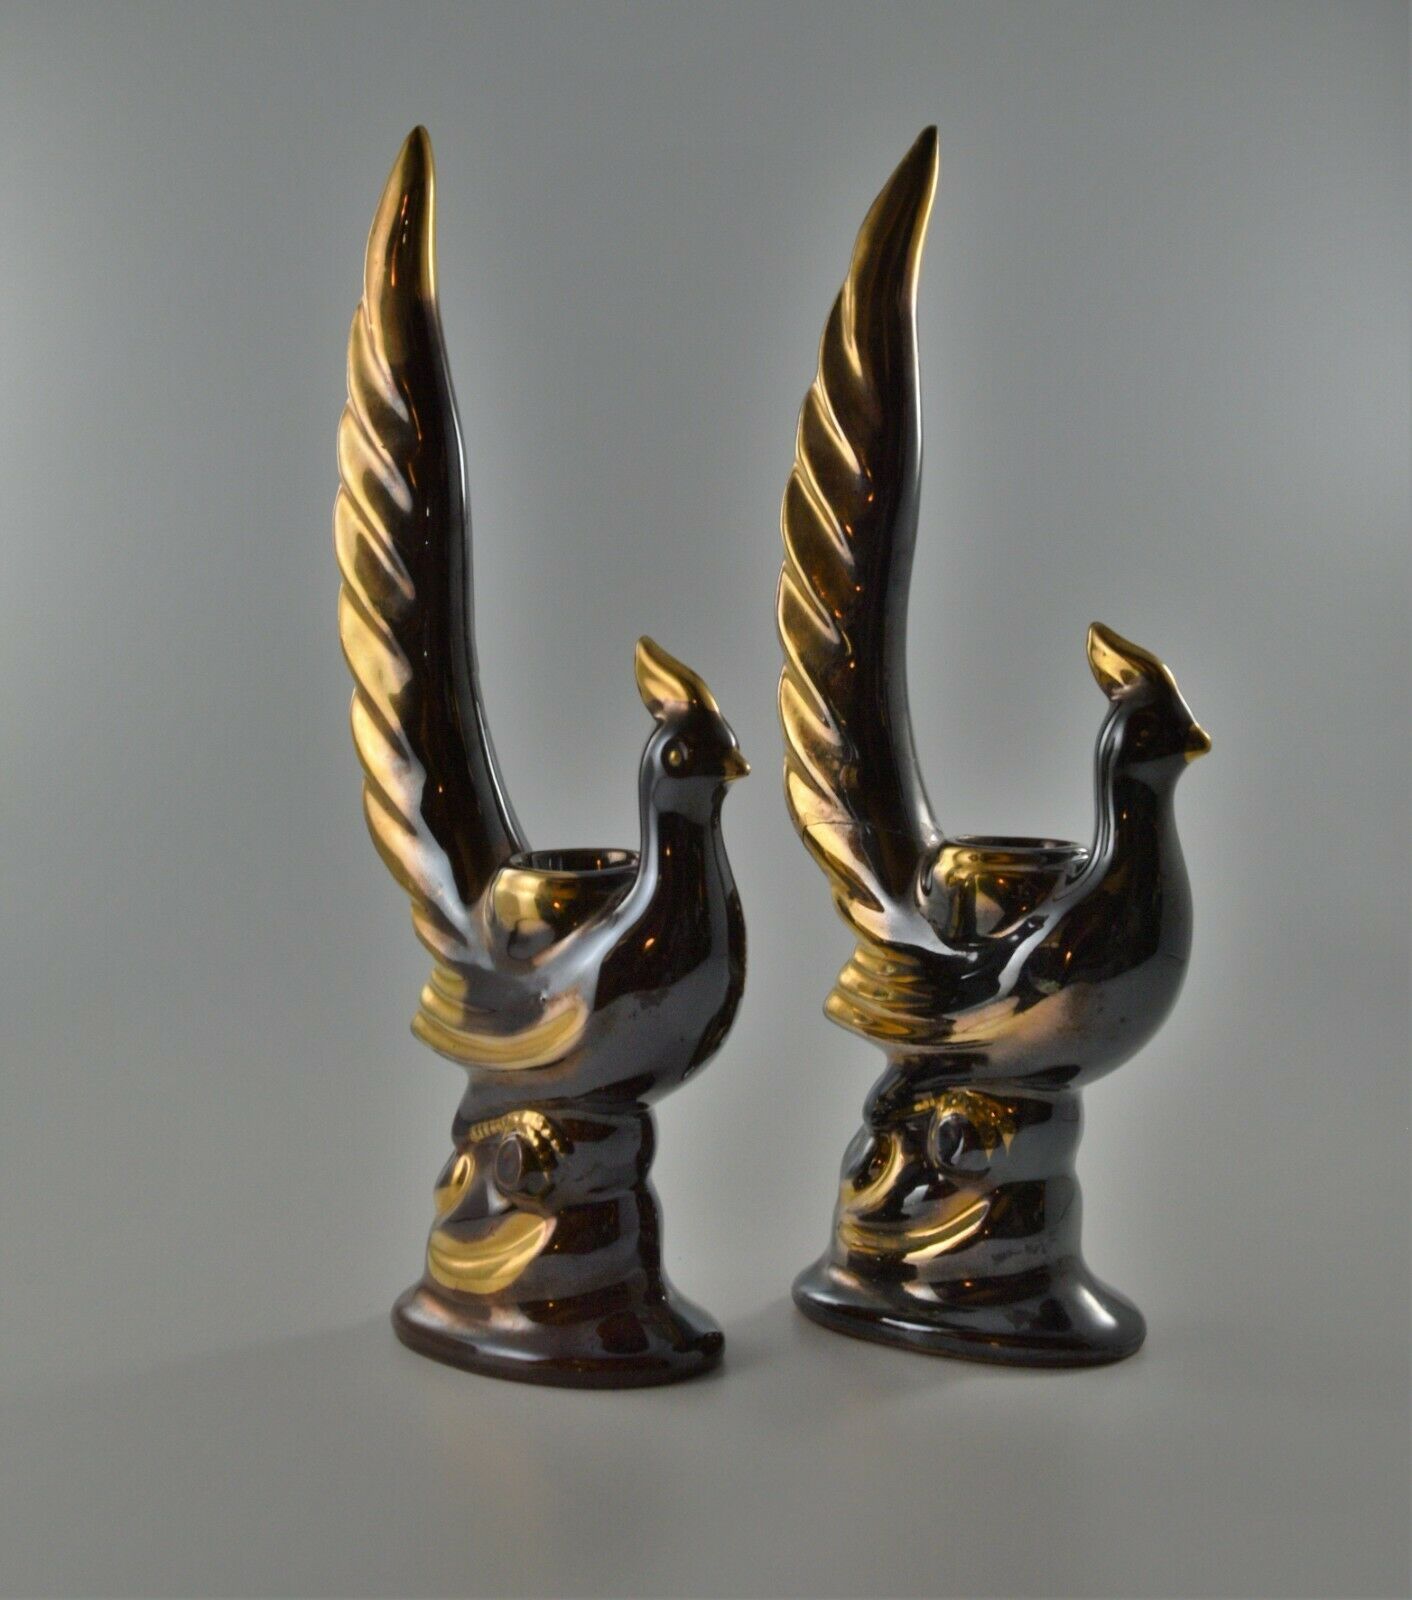 Vintage Japan Napco Plum,Brown, and Gold Iridescent Pheasant Candleholders AS IS - $30.00